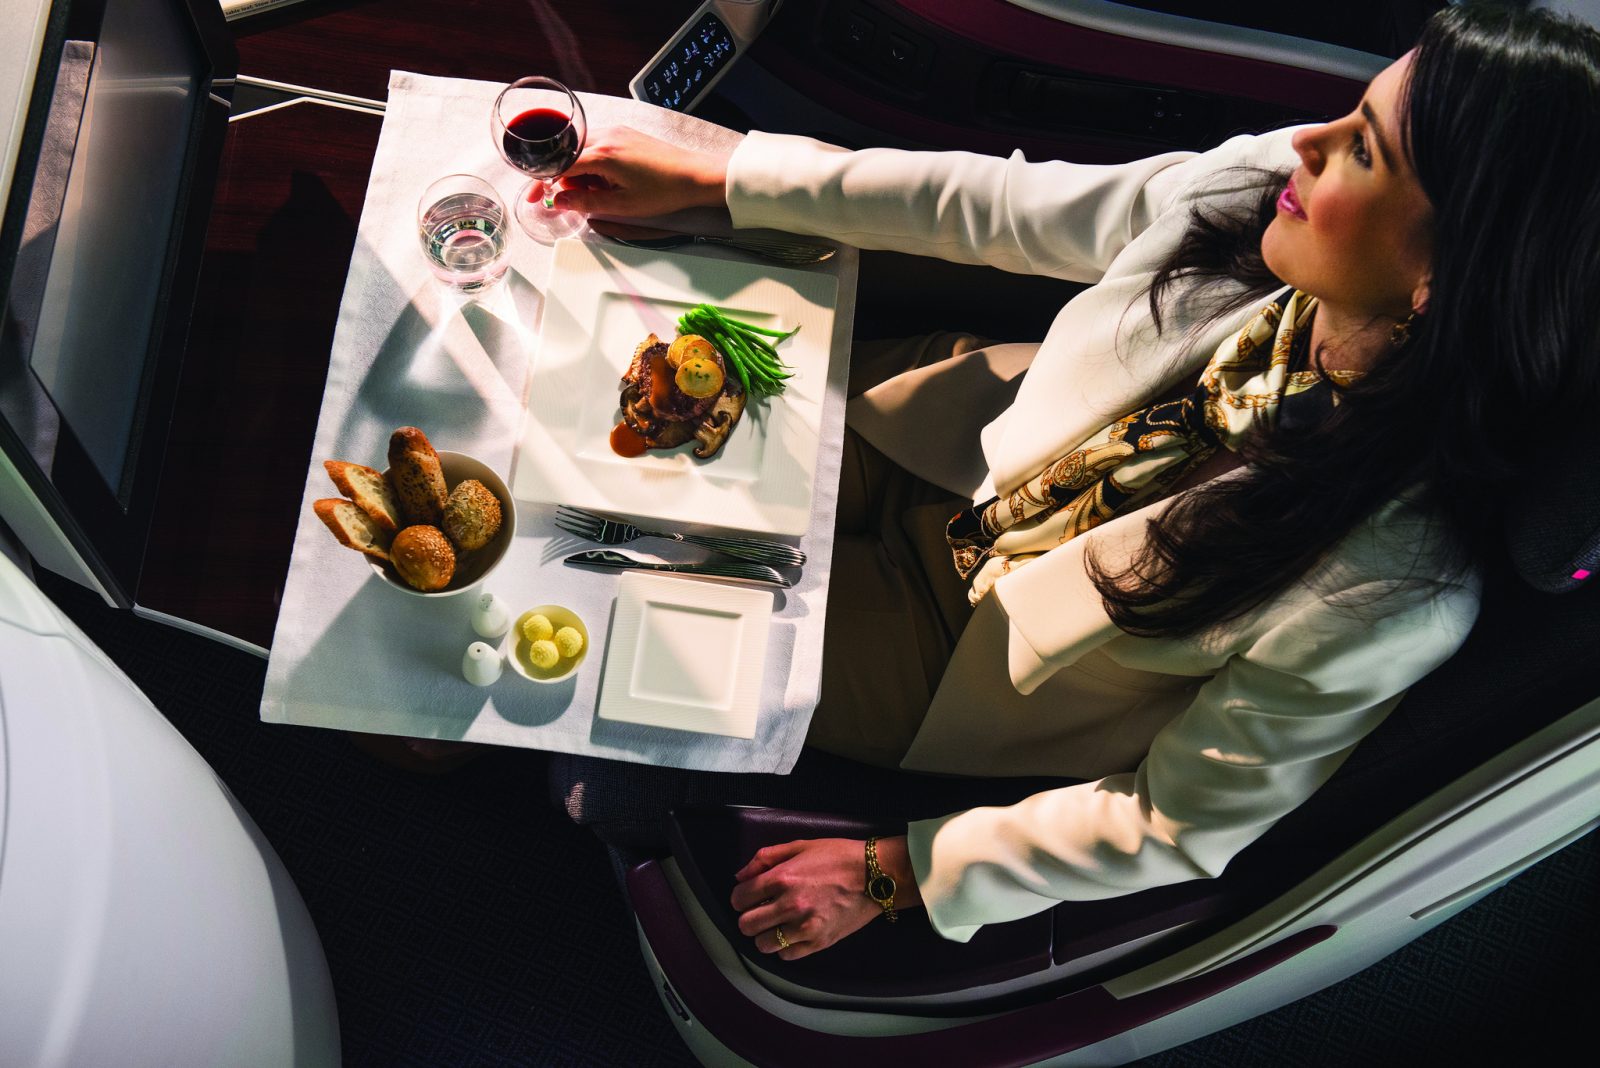 Qatar Airways Up's Its Business Class Dining Game: Now Allows Pre-Orders On Select Flights